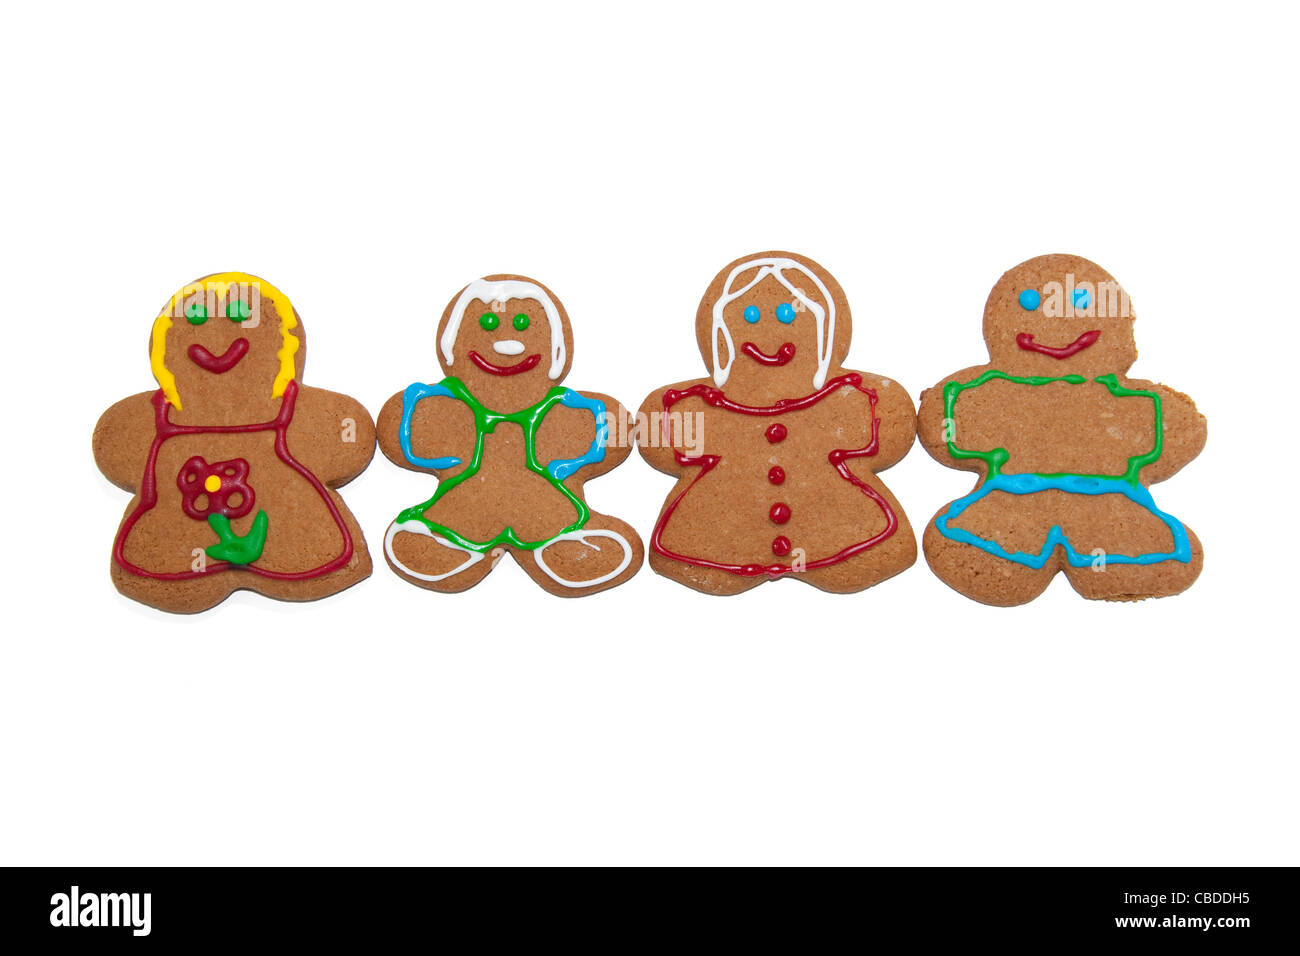 Colorful, smiling gingerbread men and women on white background Stock Photo